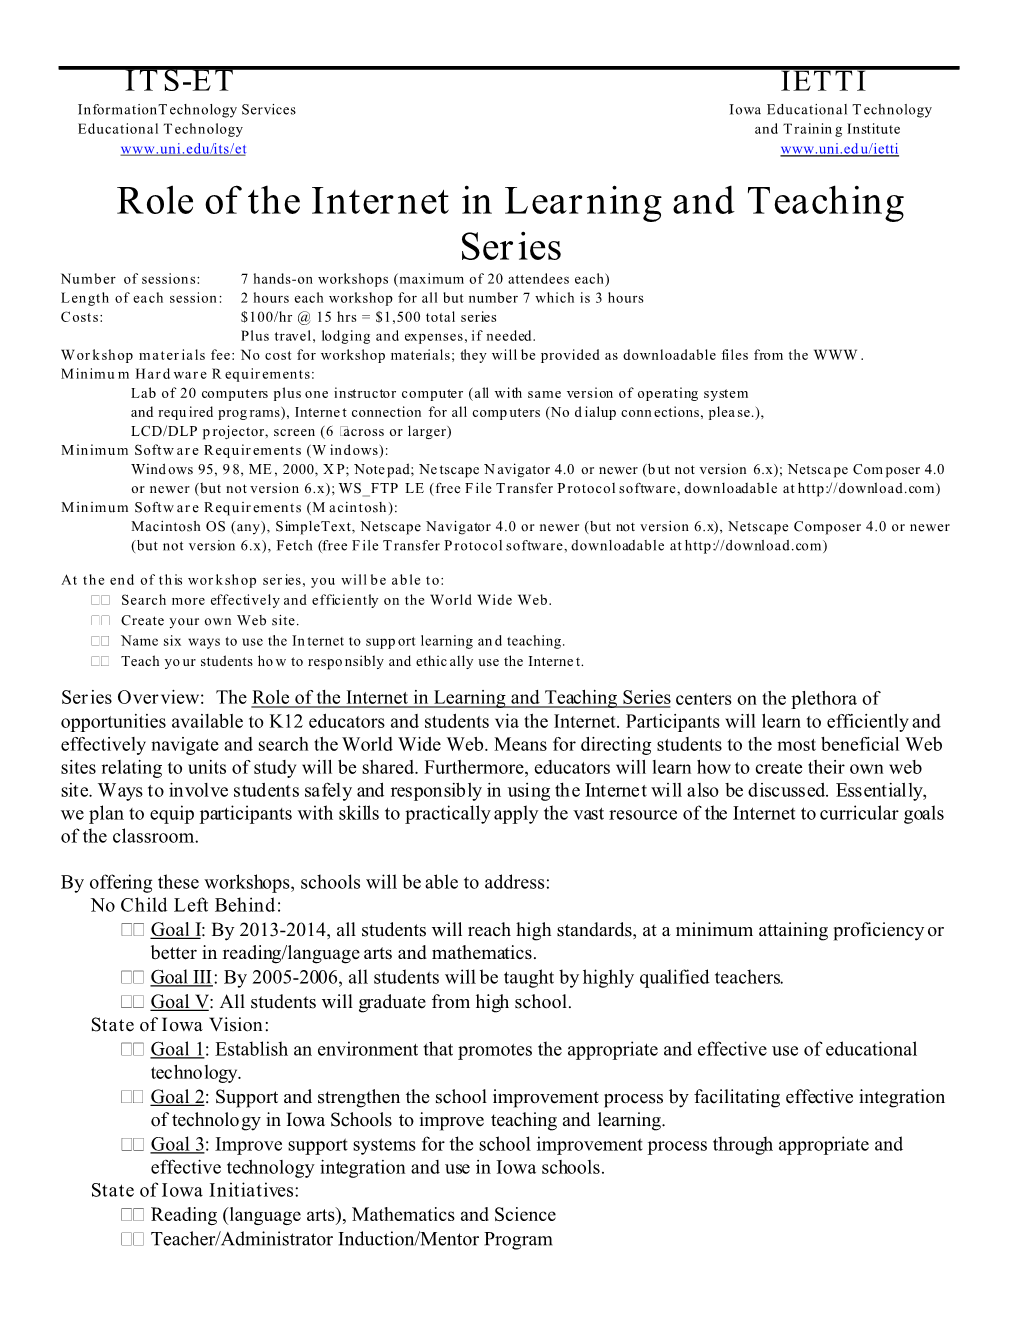 Role of the Internet in Learning and Teaching Series